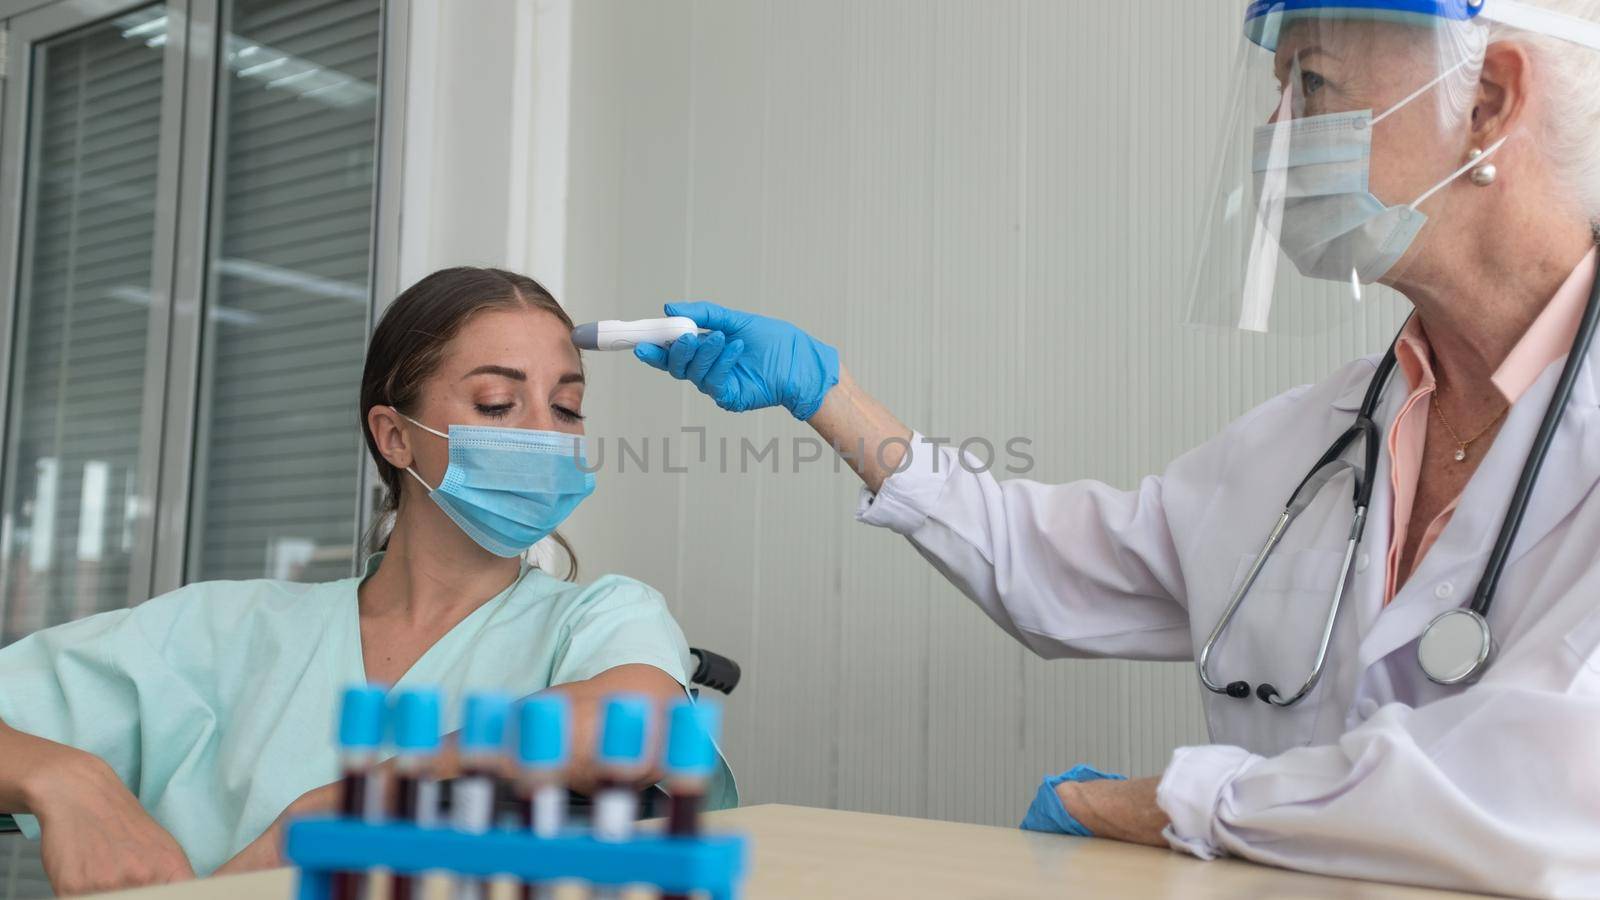 Coronavirus protection during the quarantine, Female doctor doing medical exam to a women patient. by chuanchai